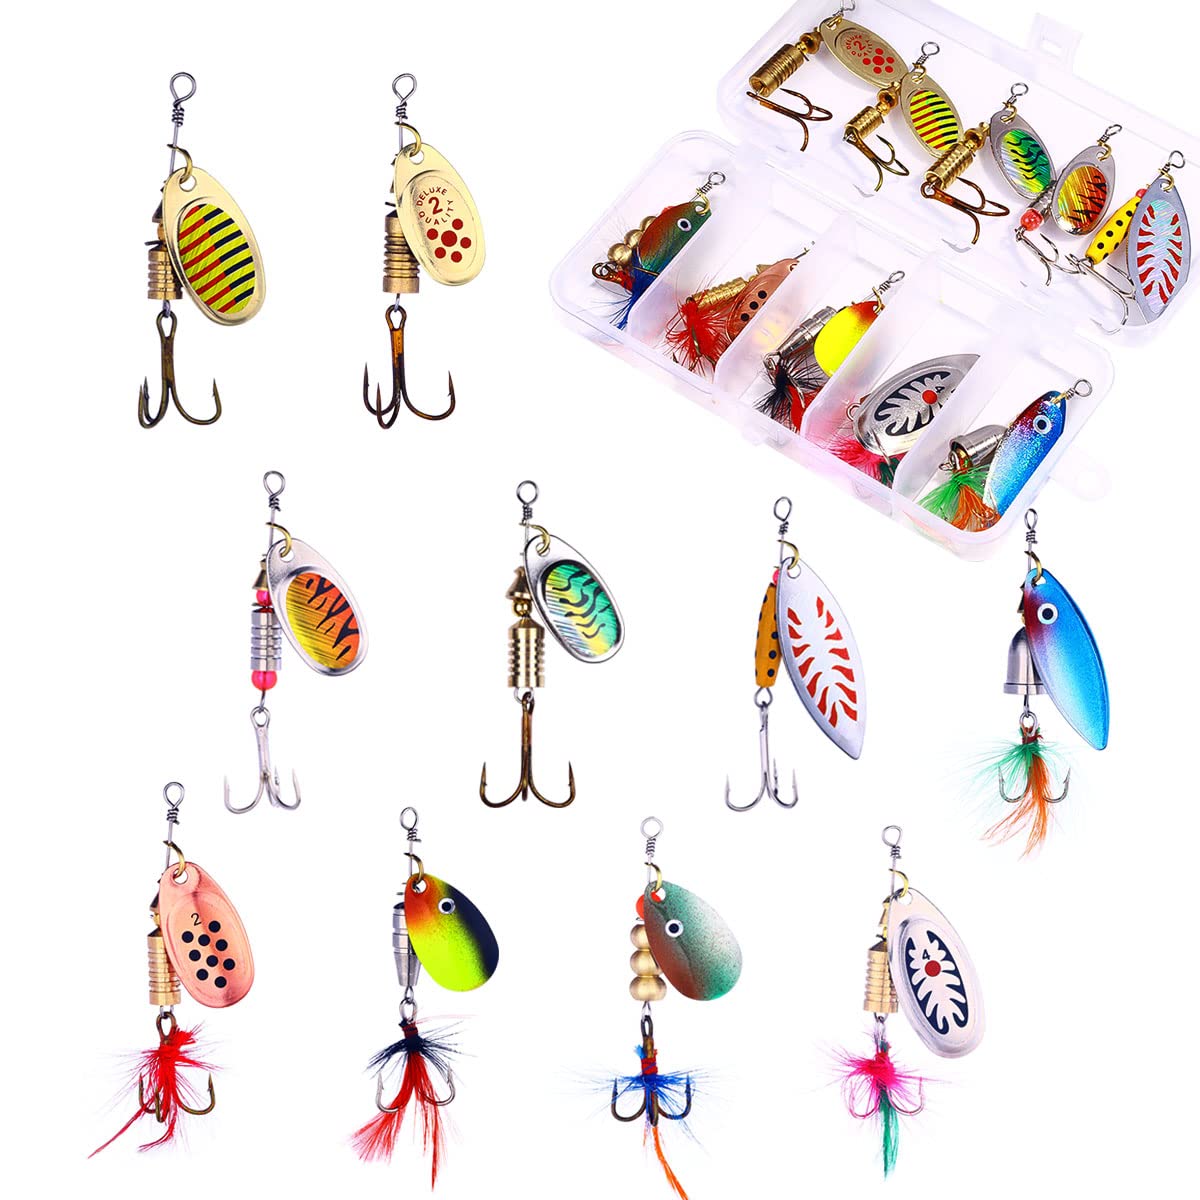 10pcs Fishing Lures Spinnerbait for Bass Trout Salmon Walleye